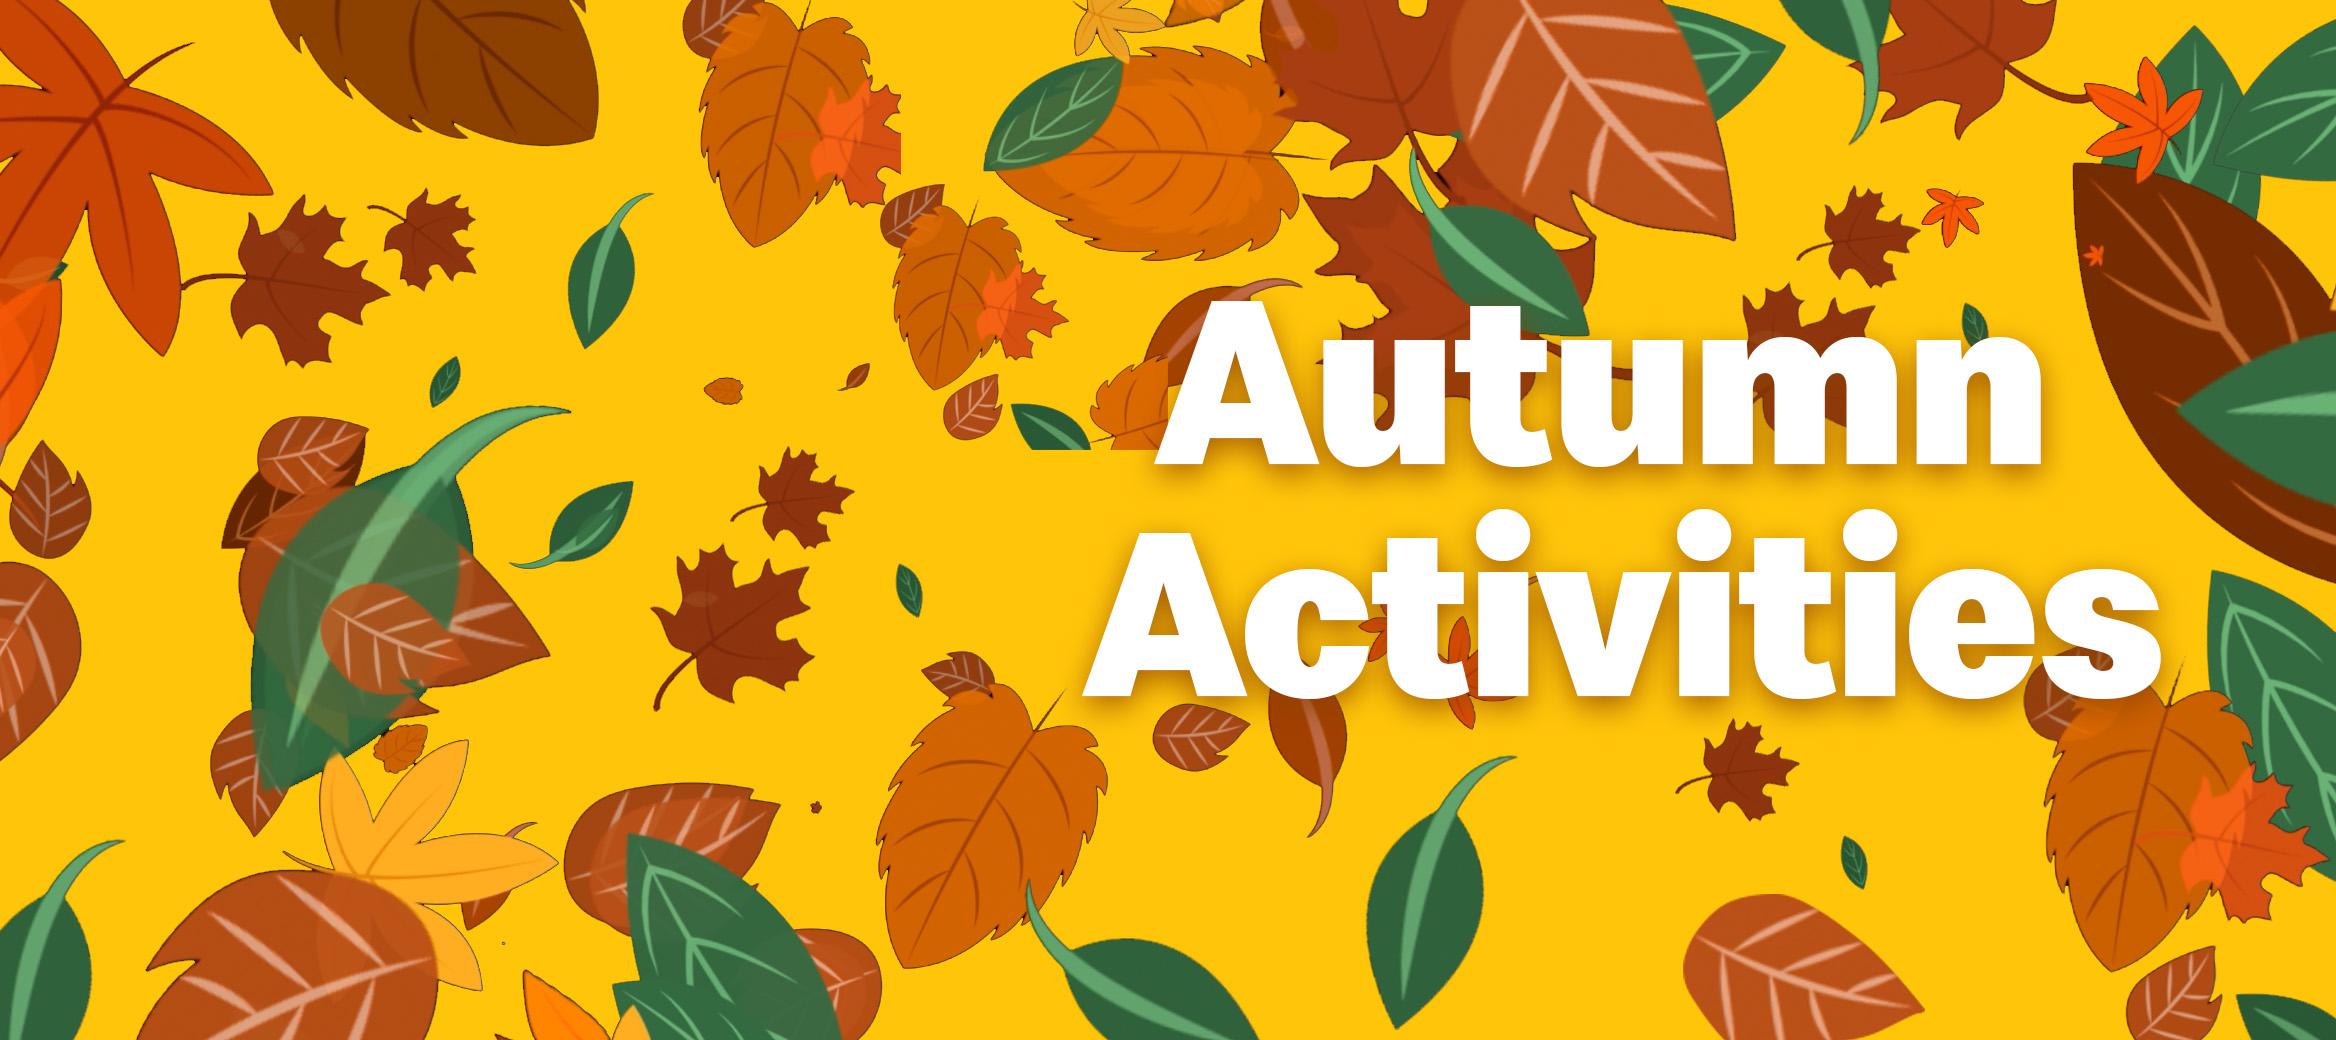 Different coloured leaves on a yellow background and a title that reads “Autumn Activities”